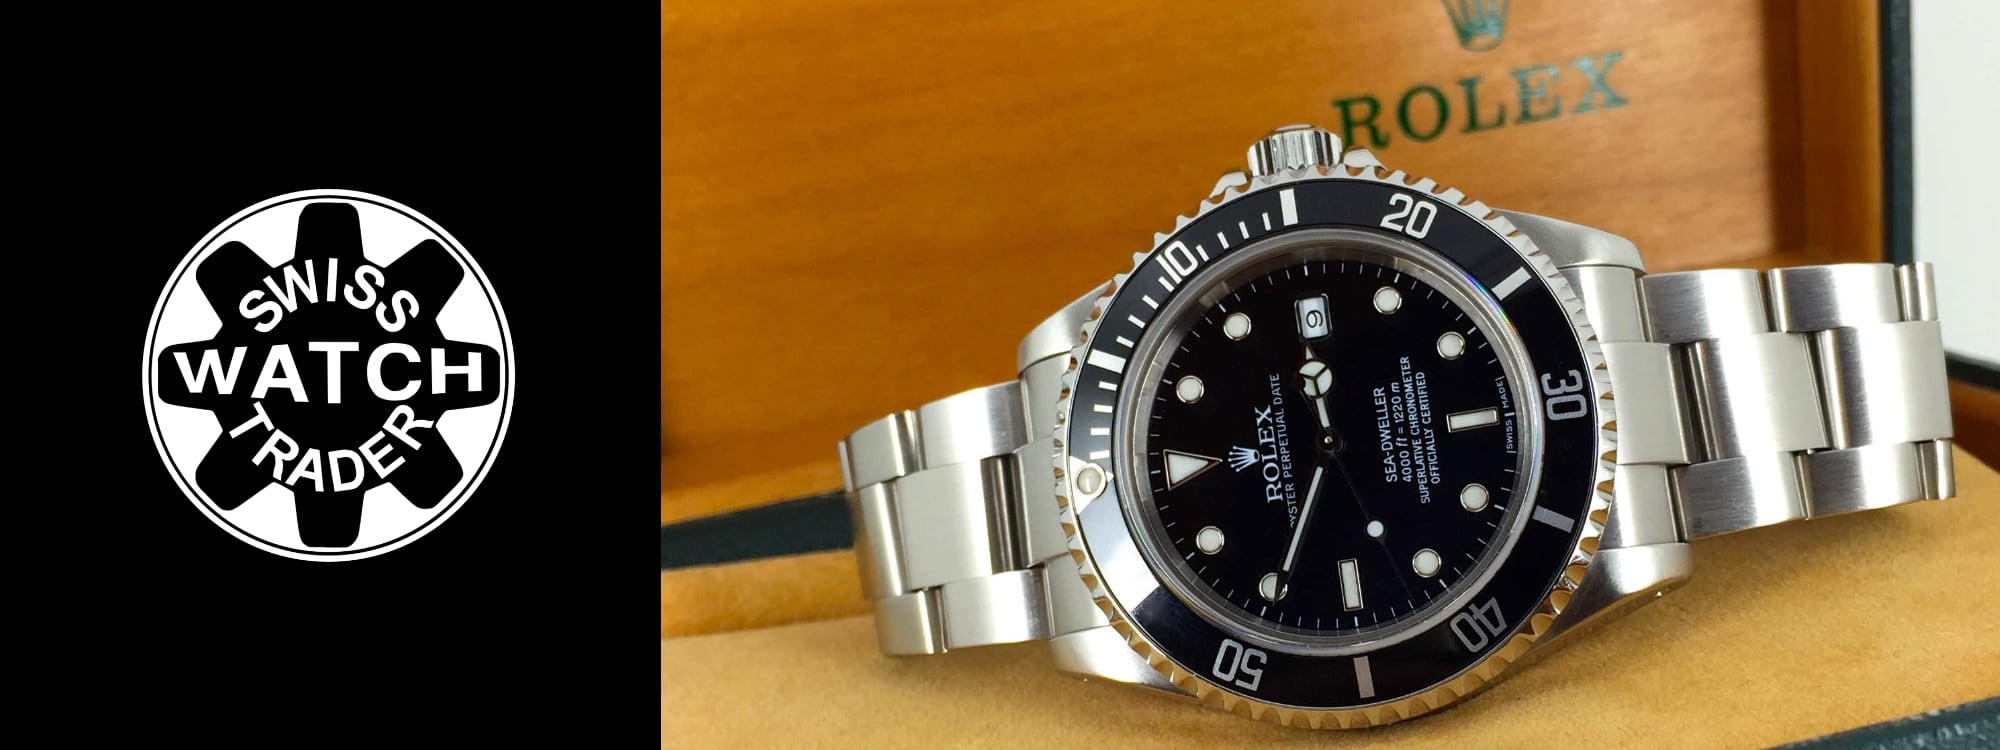 Rolex Sea Dweller 16600 | Our 5 Minute Review